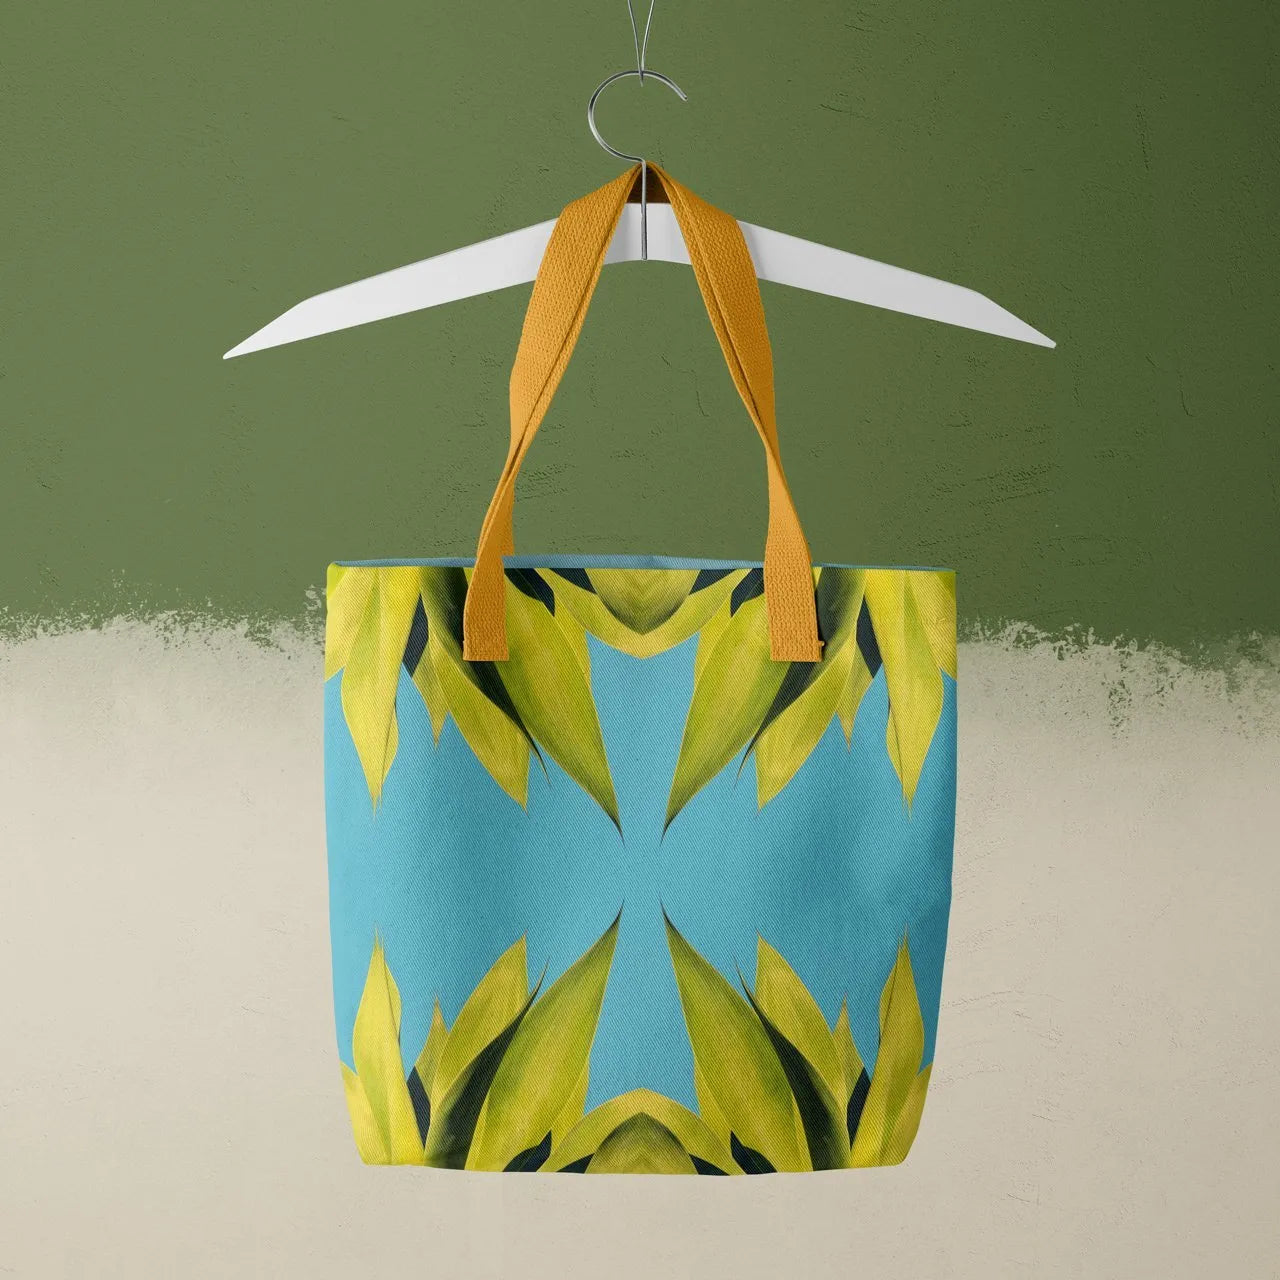 In Bloom / Bloom In Tote - Heavy Duty Reusable Grocery Bag - Yellow Handles - Shopping Totes - Aesthetic Art